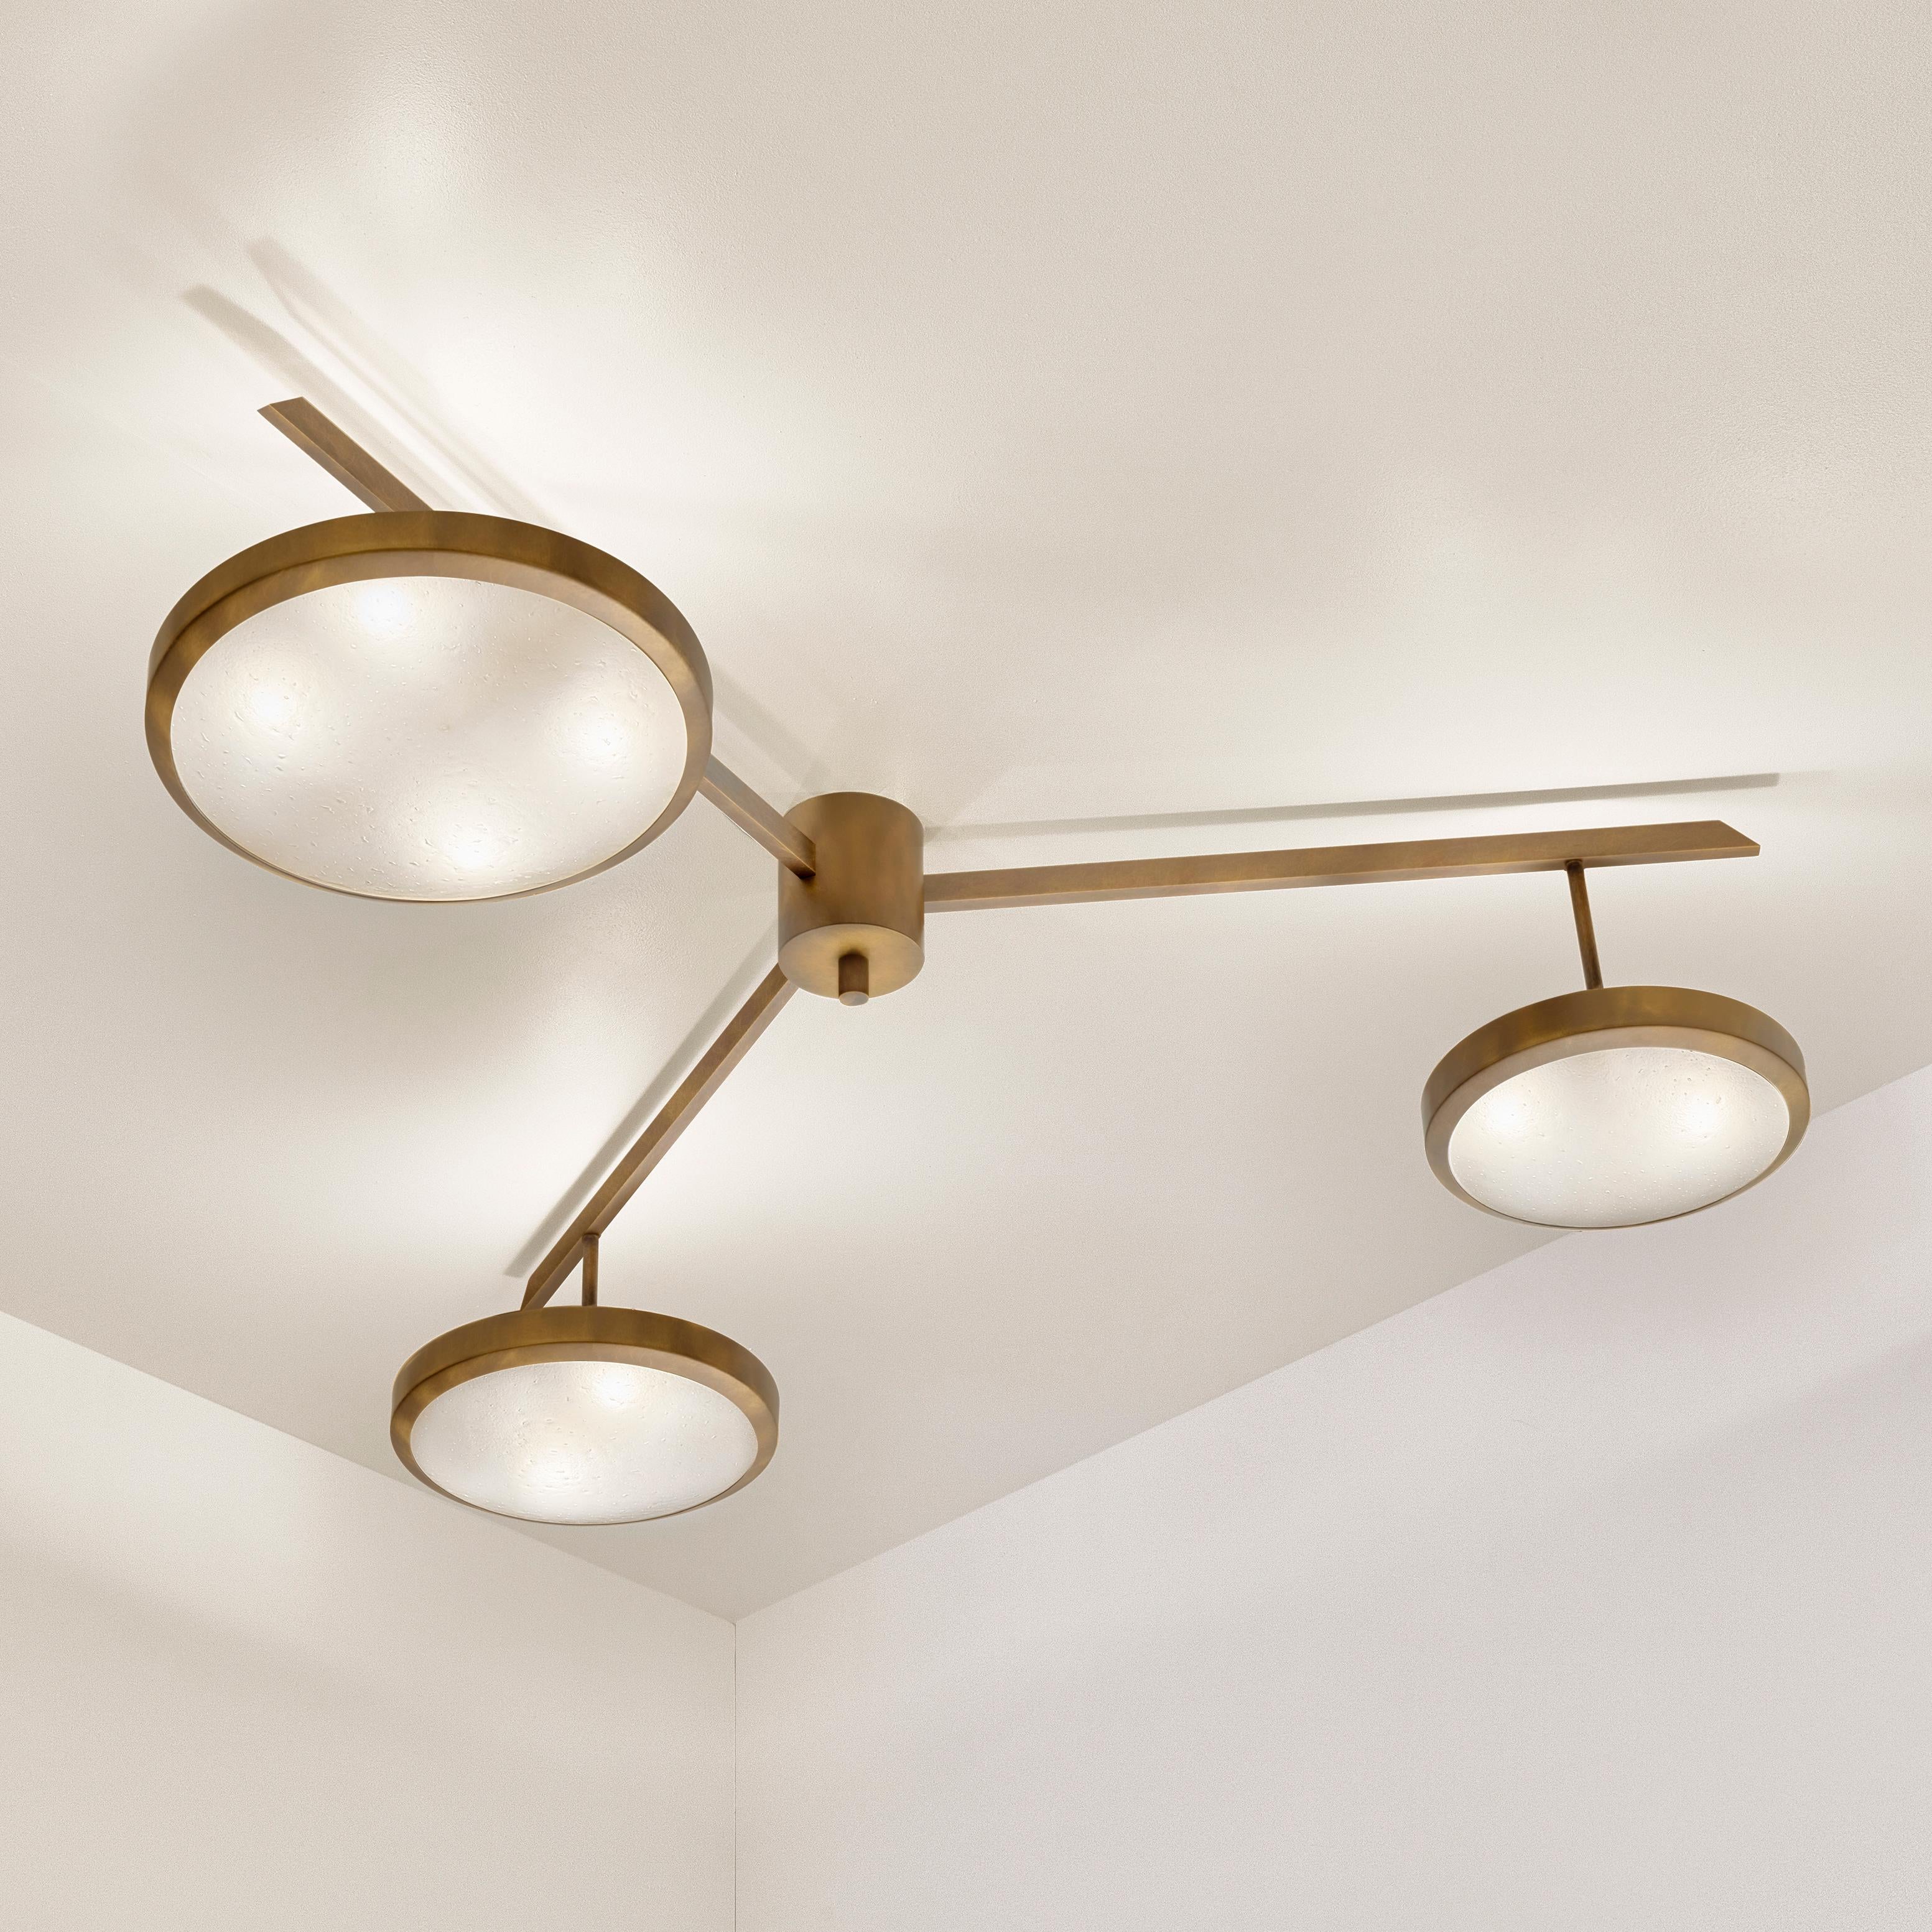 The Tre ceiling light harmoniously juxtaposes the balance of its three evenly spaced arms with the asymmetry of its variable size shades staggered at different heights. The first images show the fixture in our bronzo nuvolato (bronze)